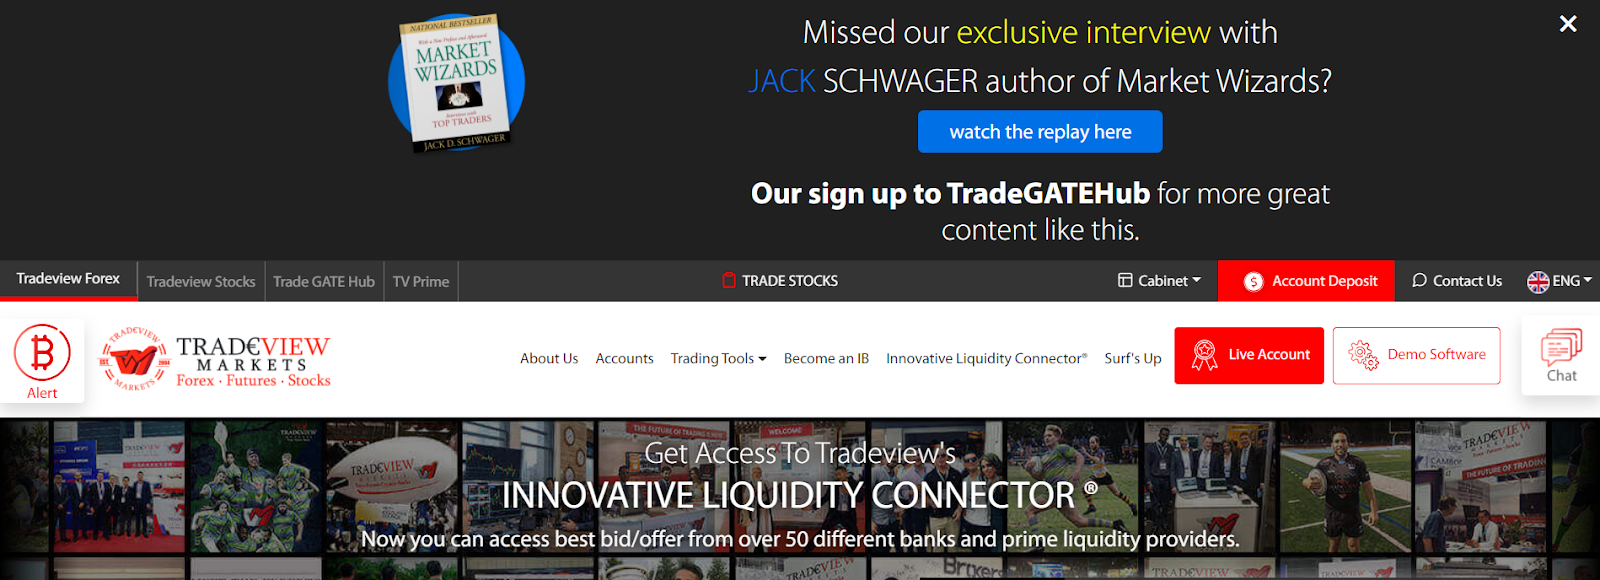 Tradeview Markets Review - Cuenta real